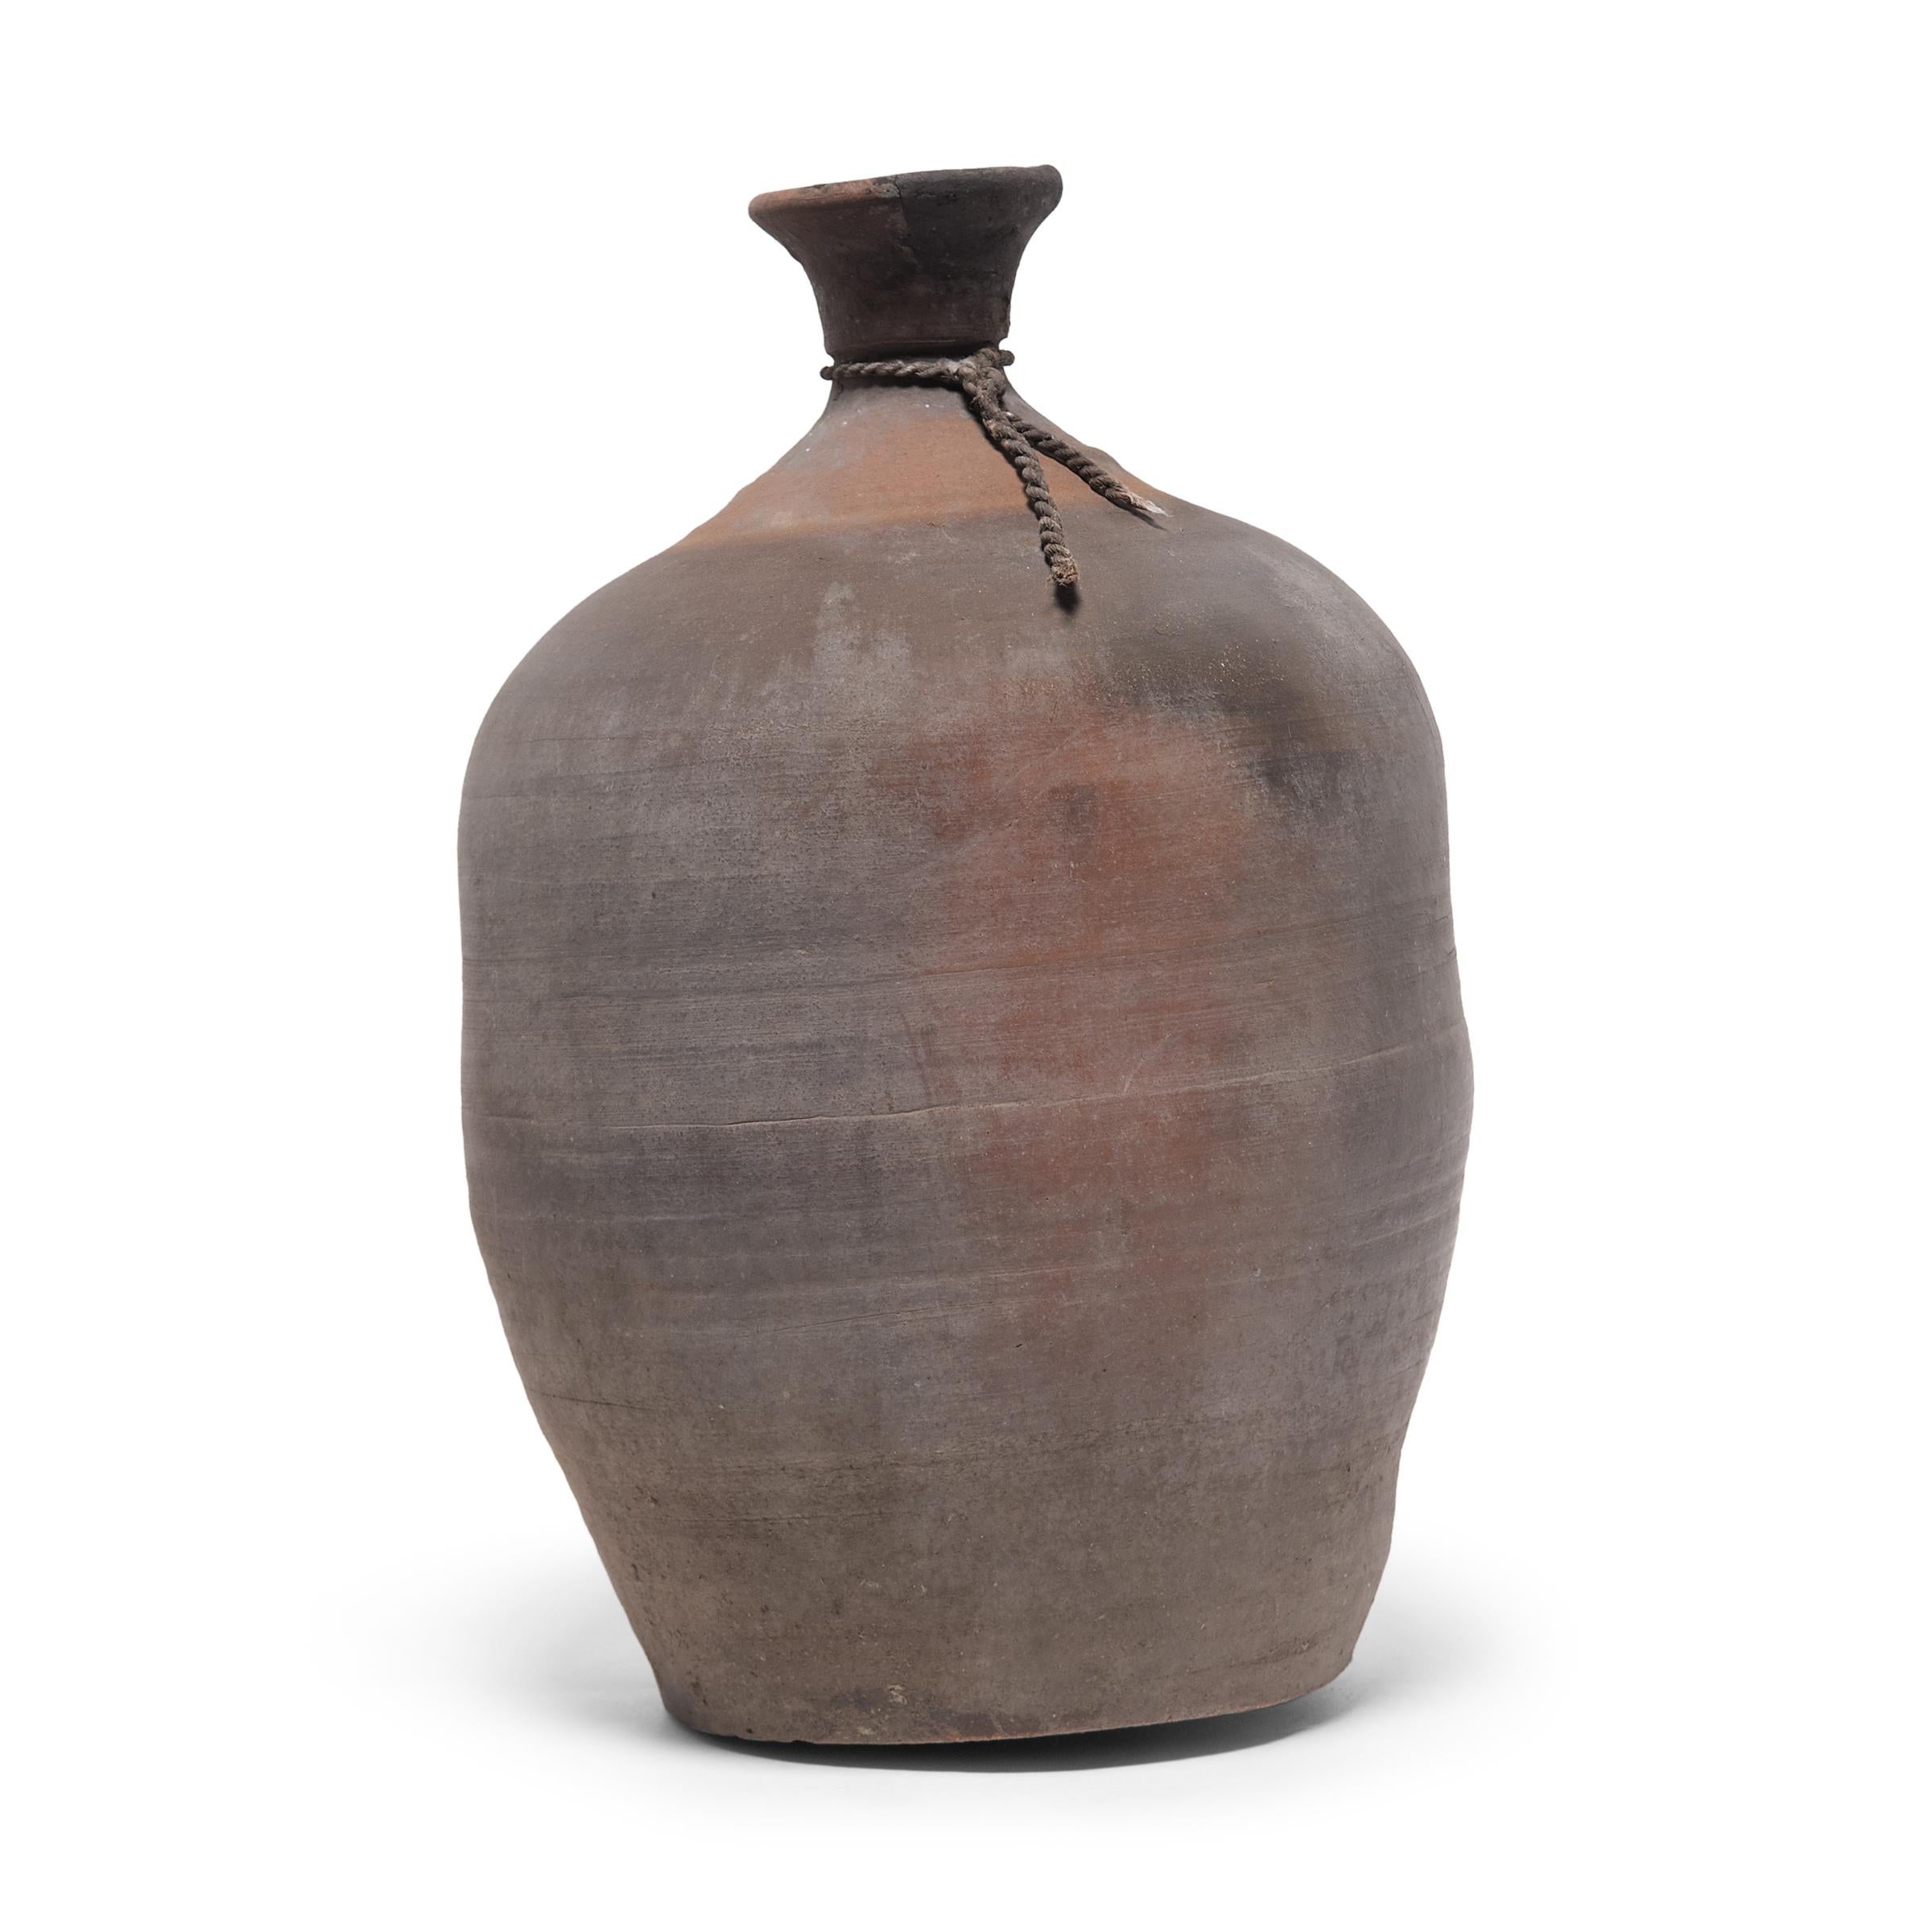 These early 20th century ceramic jars from China's Shandong province were formed with a bottle-neck shape meant for storing vinegar or rice wine. We suspect these jars were created to store wine for commercial sale, and were likely stoppered with a